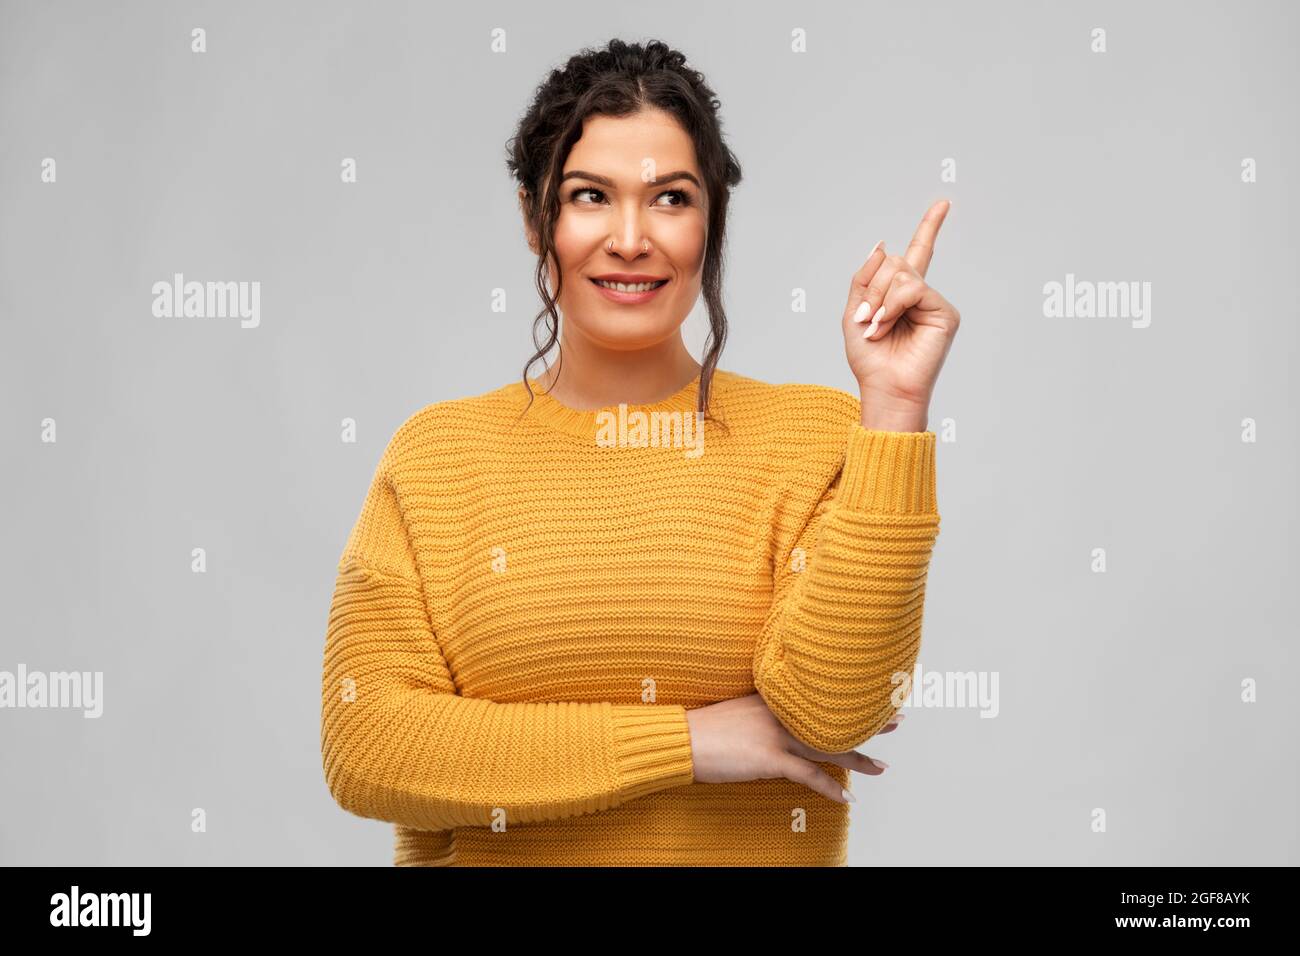 happy smiling young woman pointing finger up Stock Photo